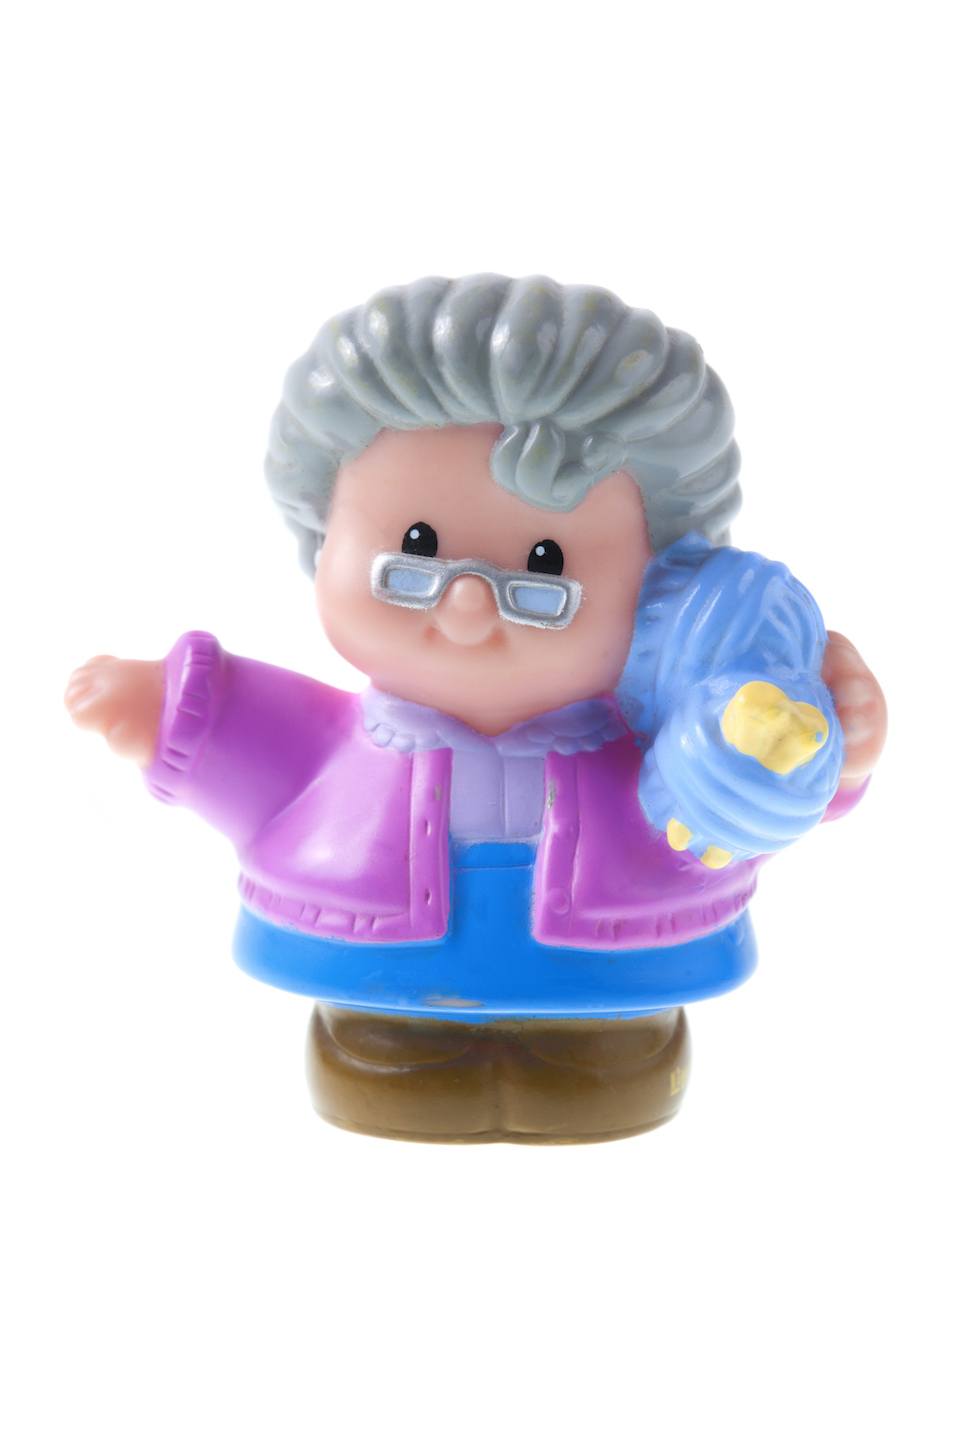 A studio shot of a Fisher Price Little People Grand Mother